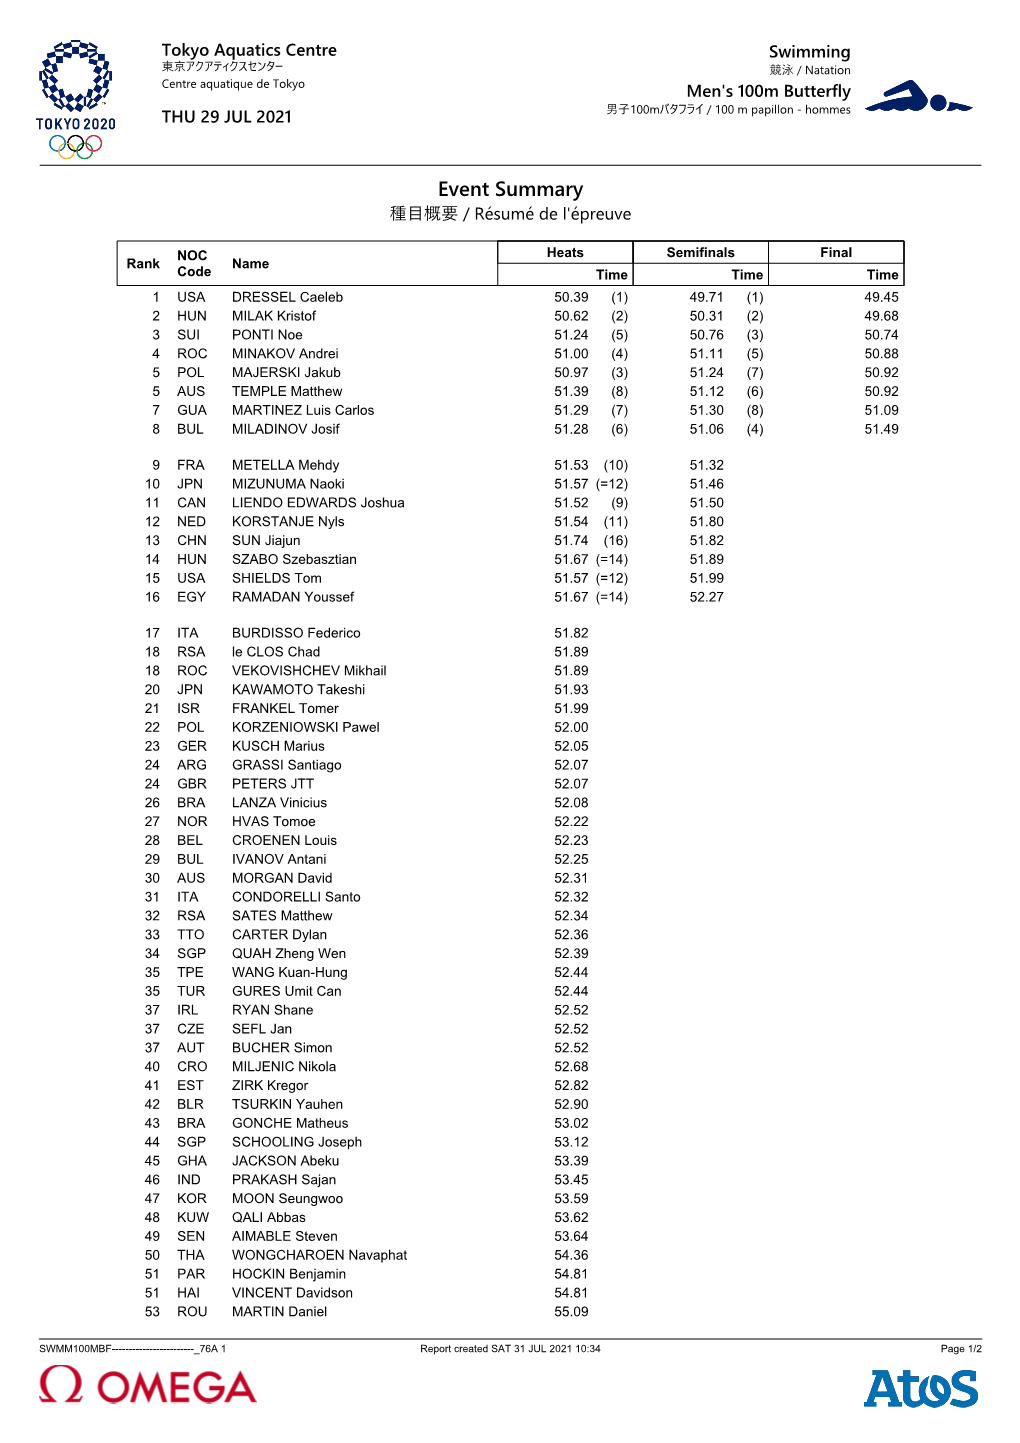 2020 Tokyo Olympic Games Day 7 Finals Results